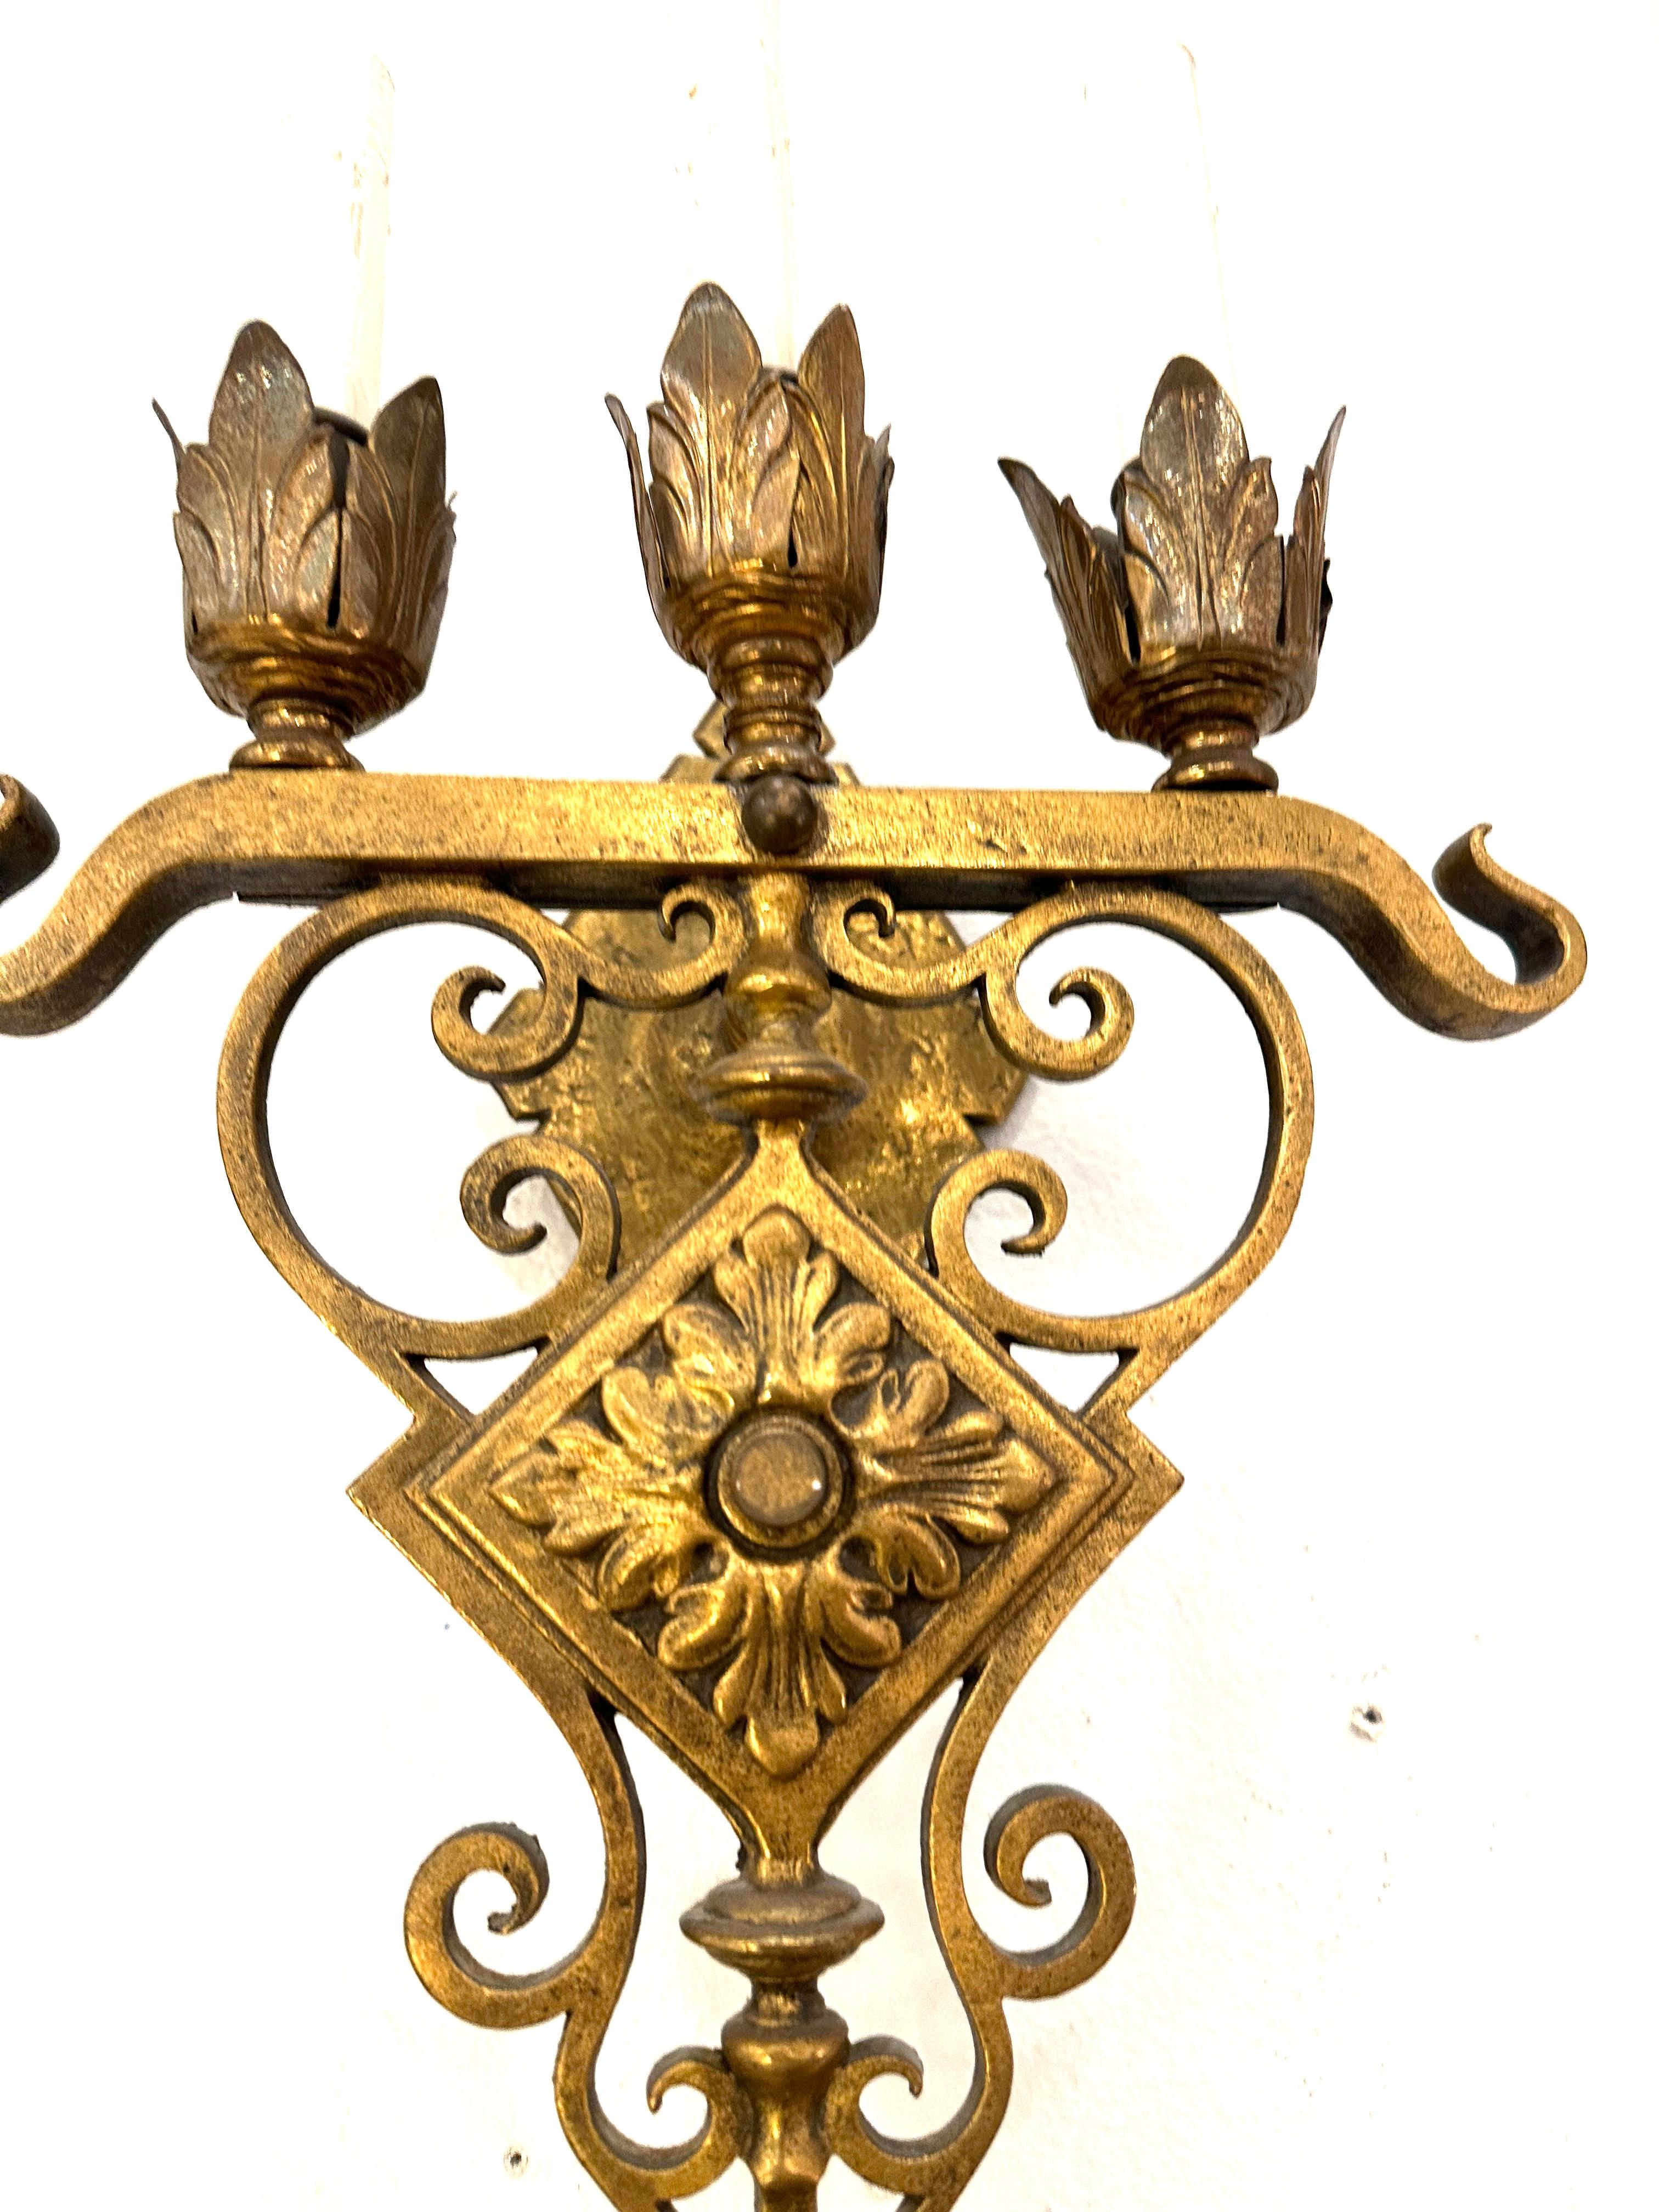 1930s Gilt Bronze wall sconces.  Each sconce has three candle lights,  Electrified, in charming flower style lights with shield shape support.